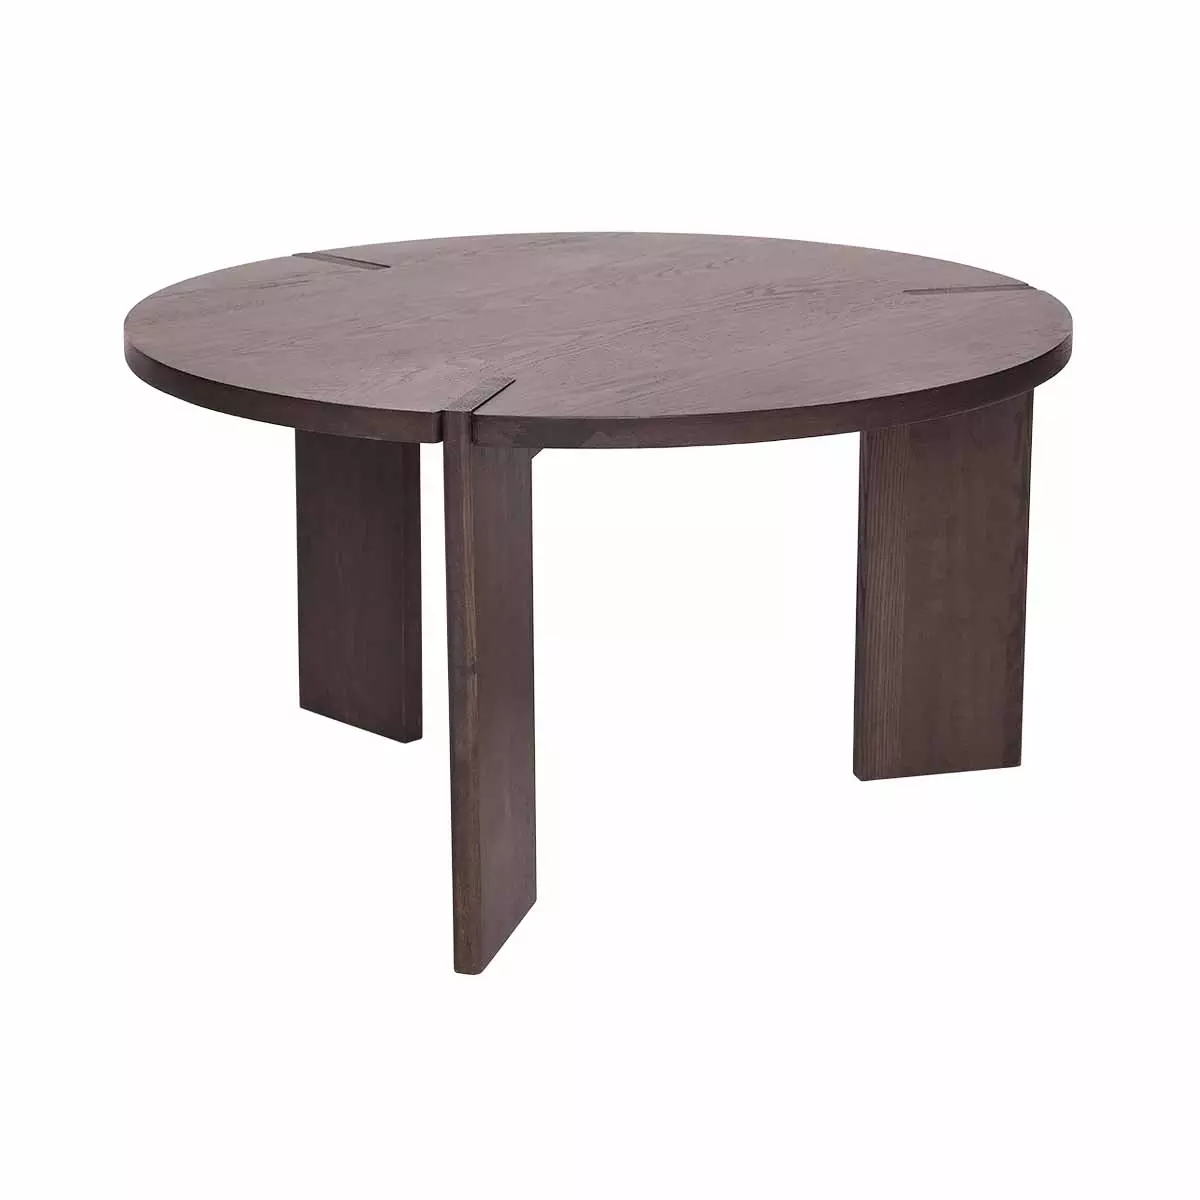 Oyoy Living Oy Coffee Table Small